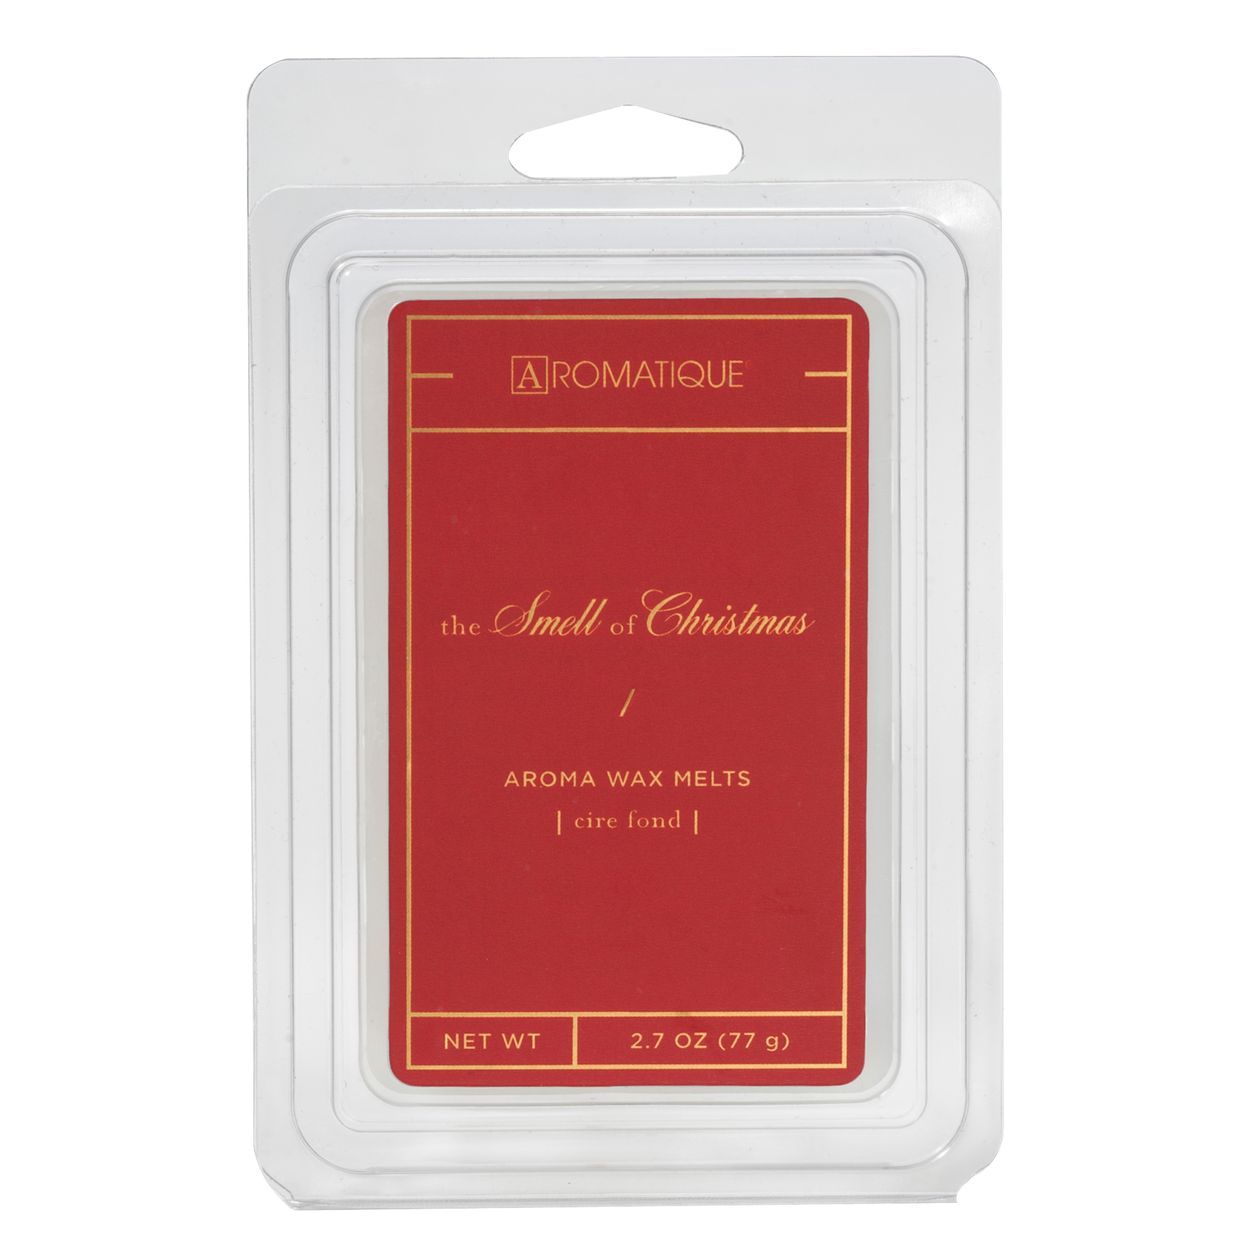 SMELL OF CHRISTMAS WAX MELT by Aromatique